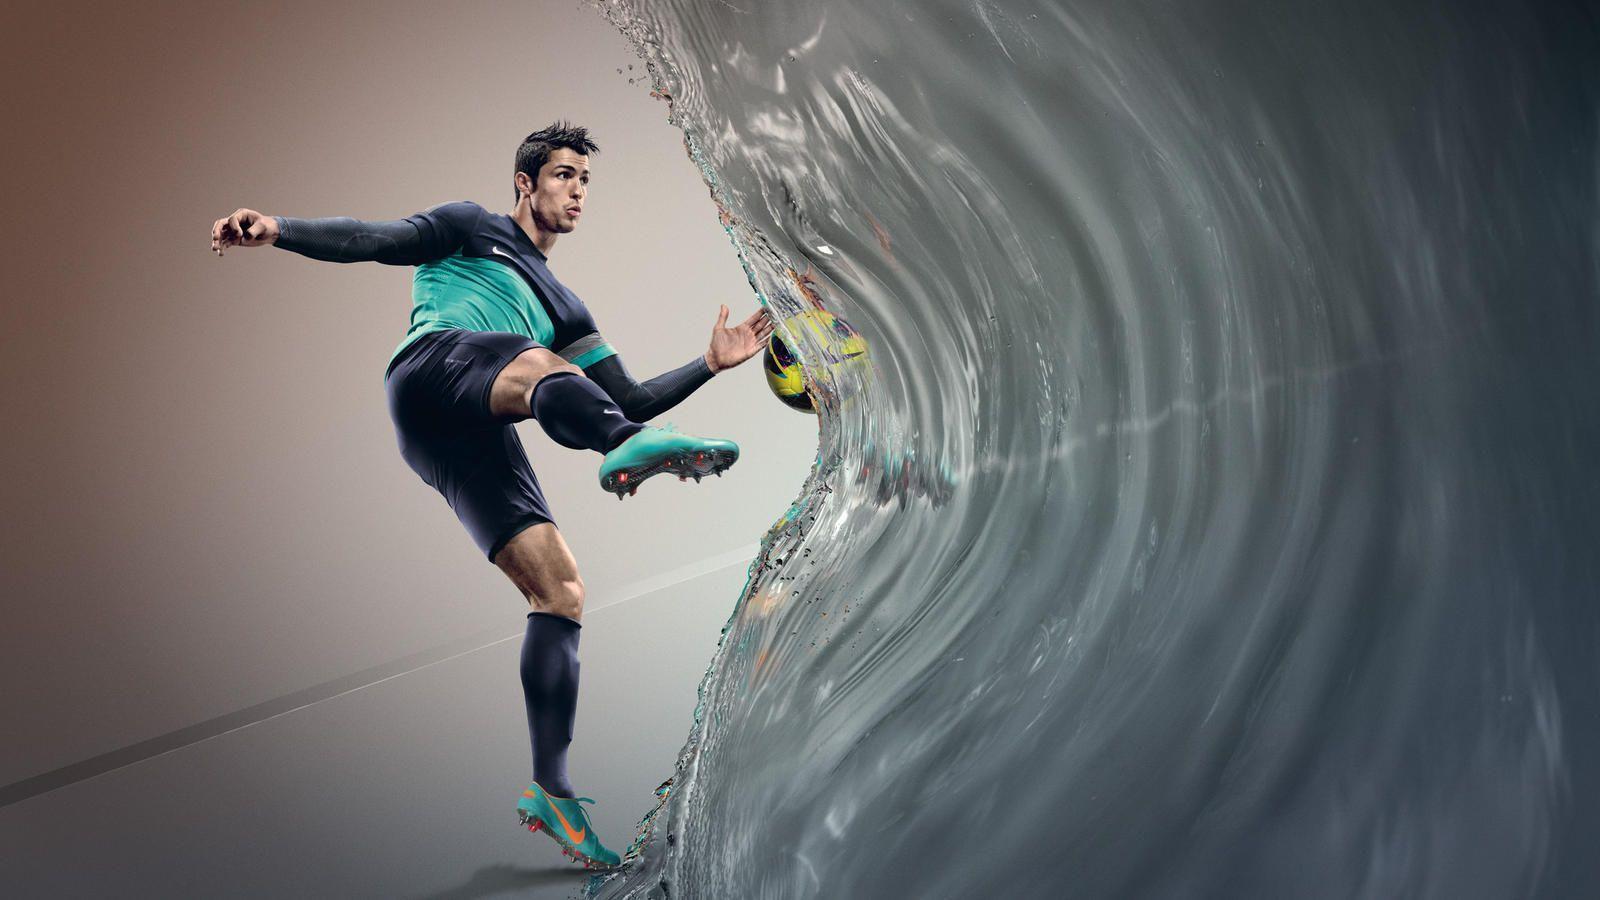 Nike News unveils All Conditions Control Technology across